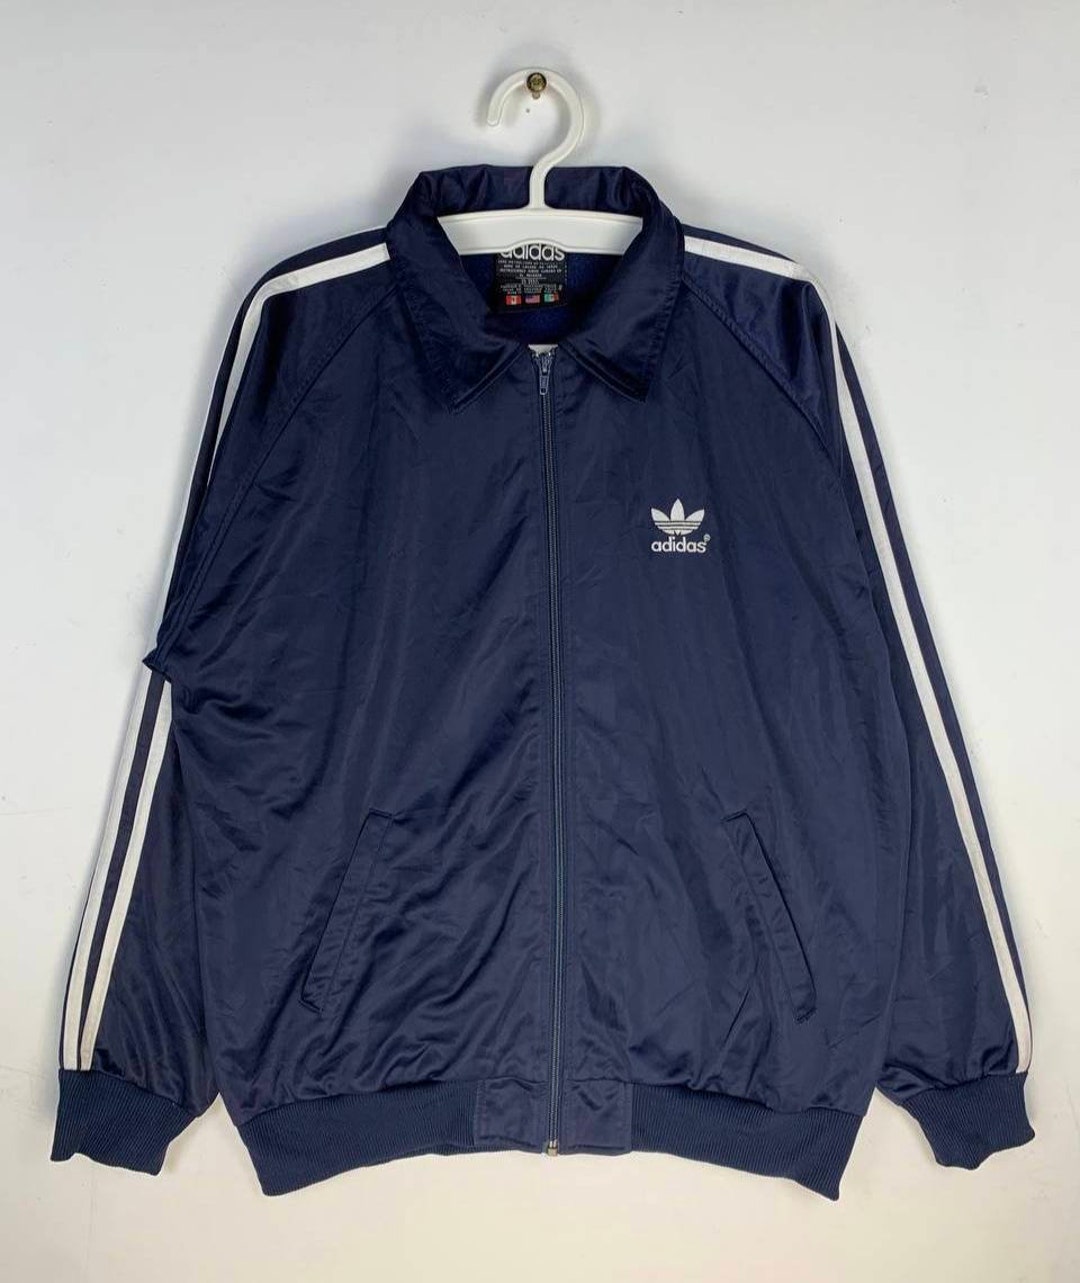 Adidas Navy Blue Track Top Jacket Made in Thailand - Etsy Canada